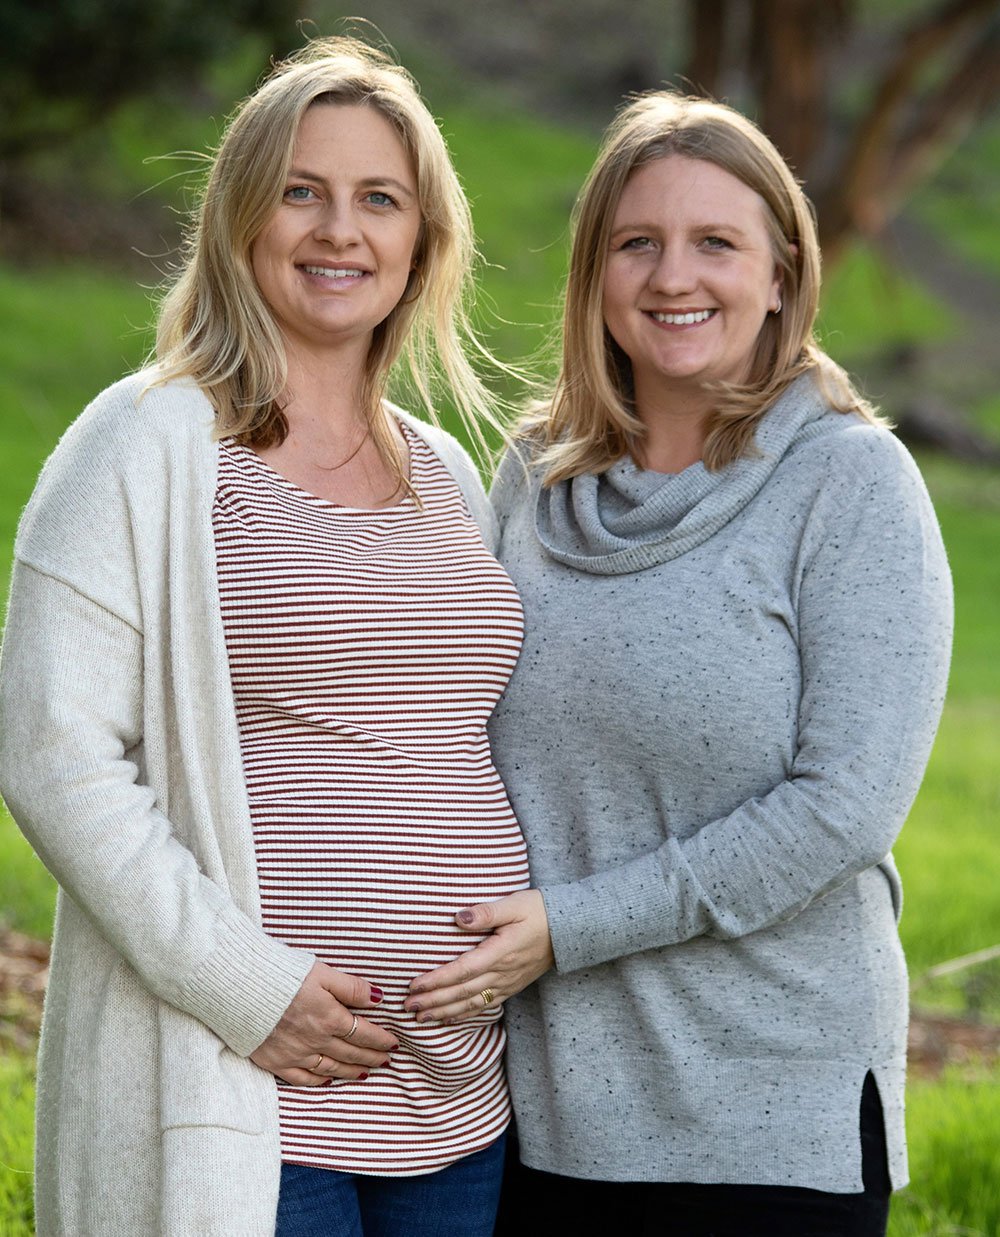 lisa fast smiling as she poses with her pregnant sister for a photo outside.